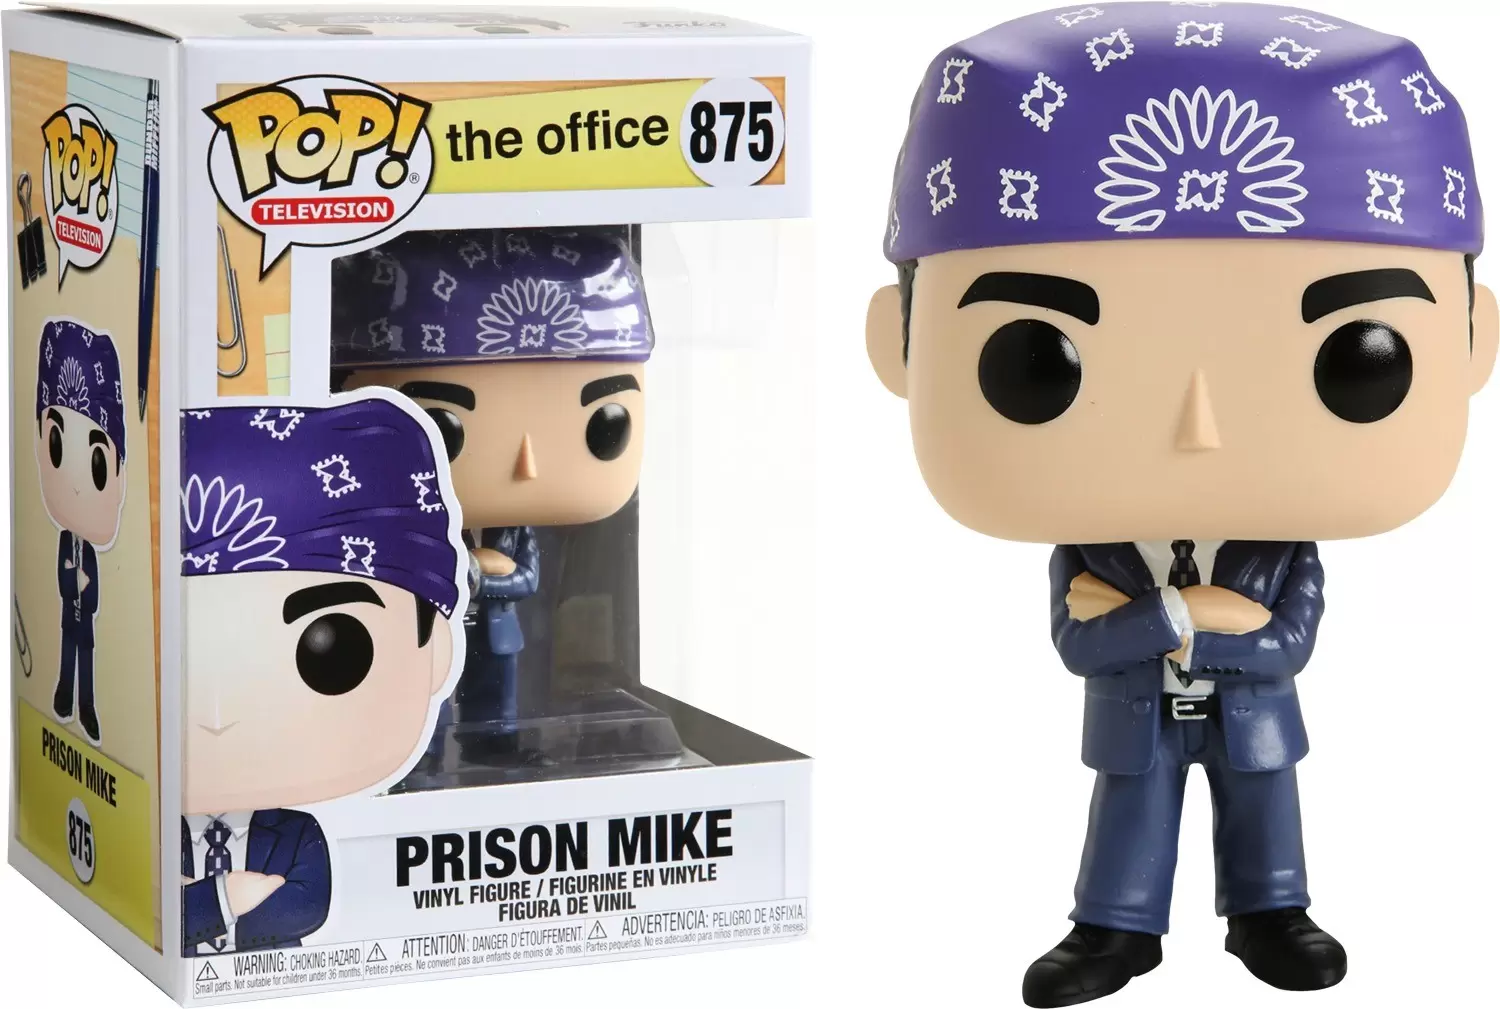 POP! Television - The Office - Prison Mike